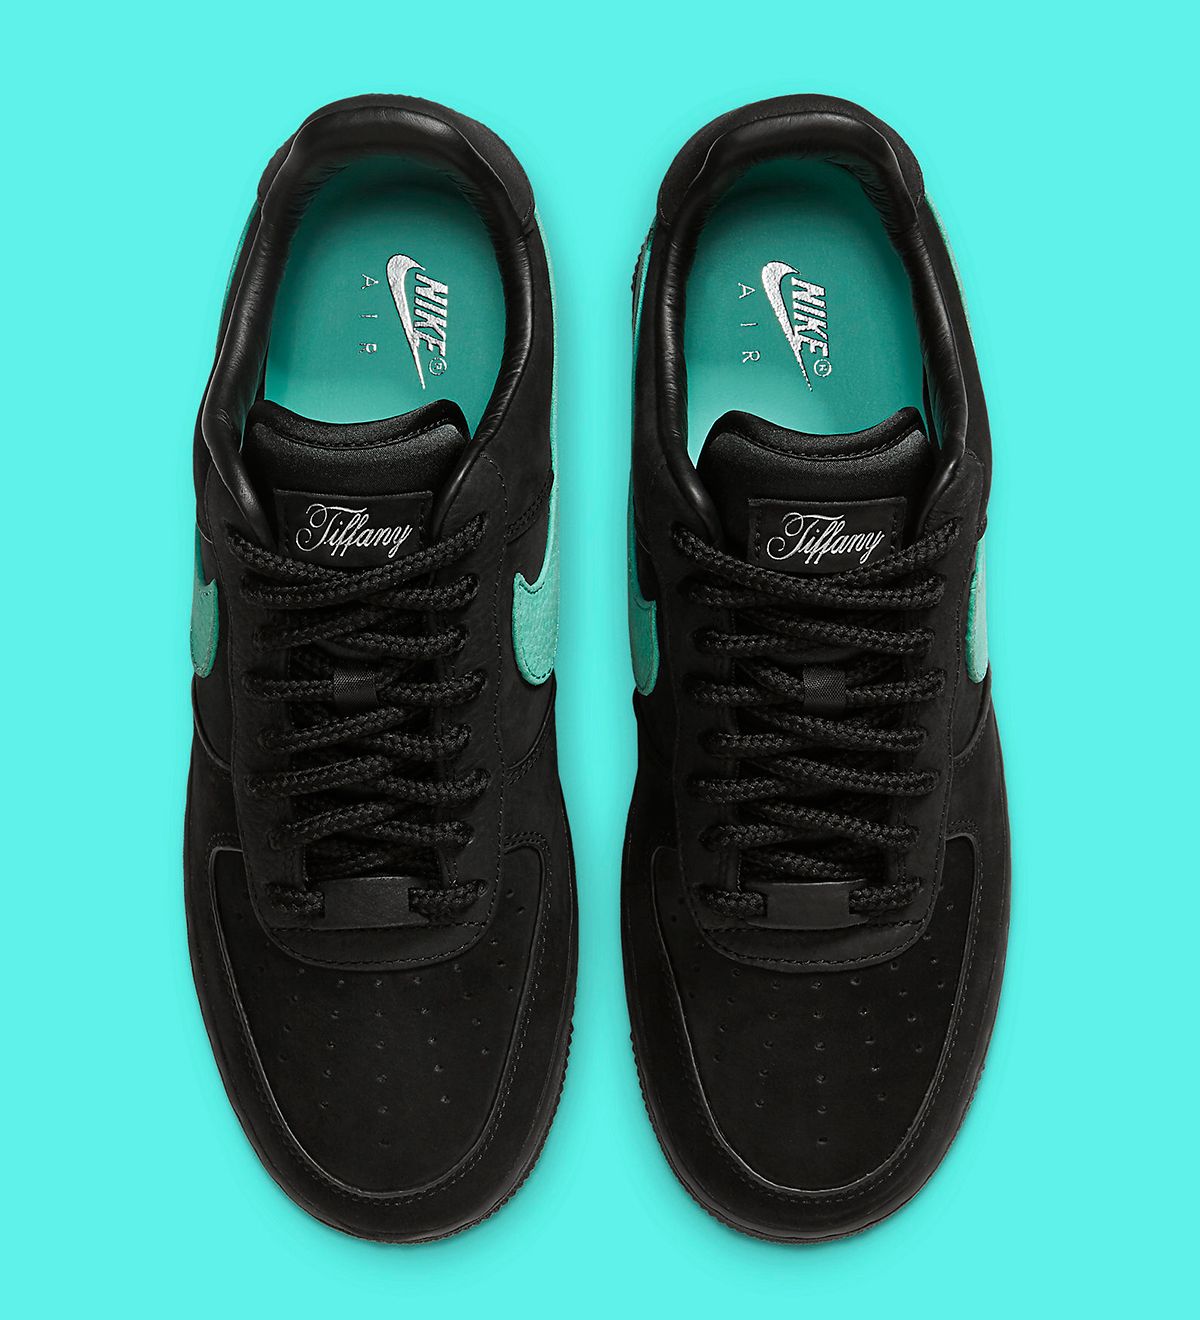 Tiffany Nike Air Force 1 Low for $400? 